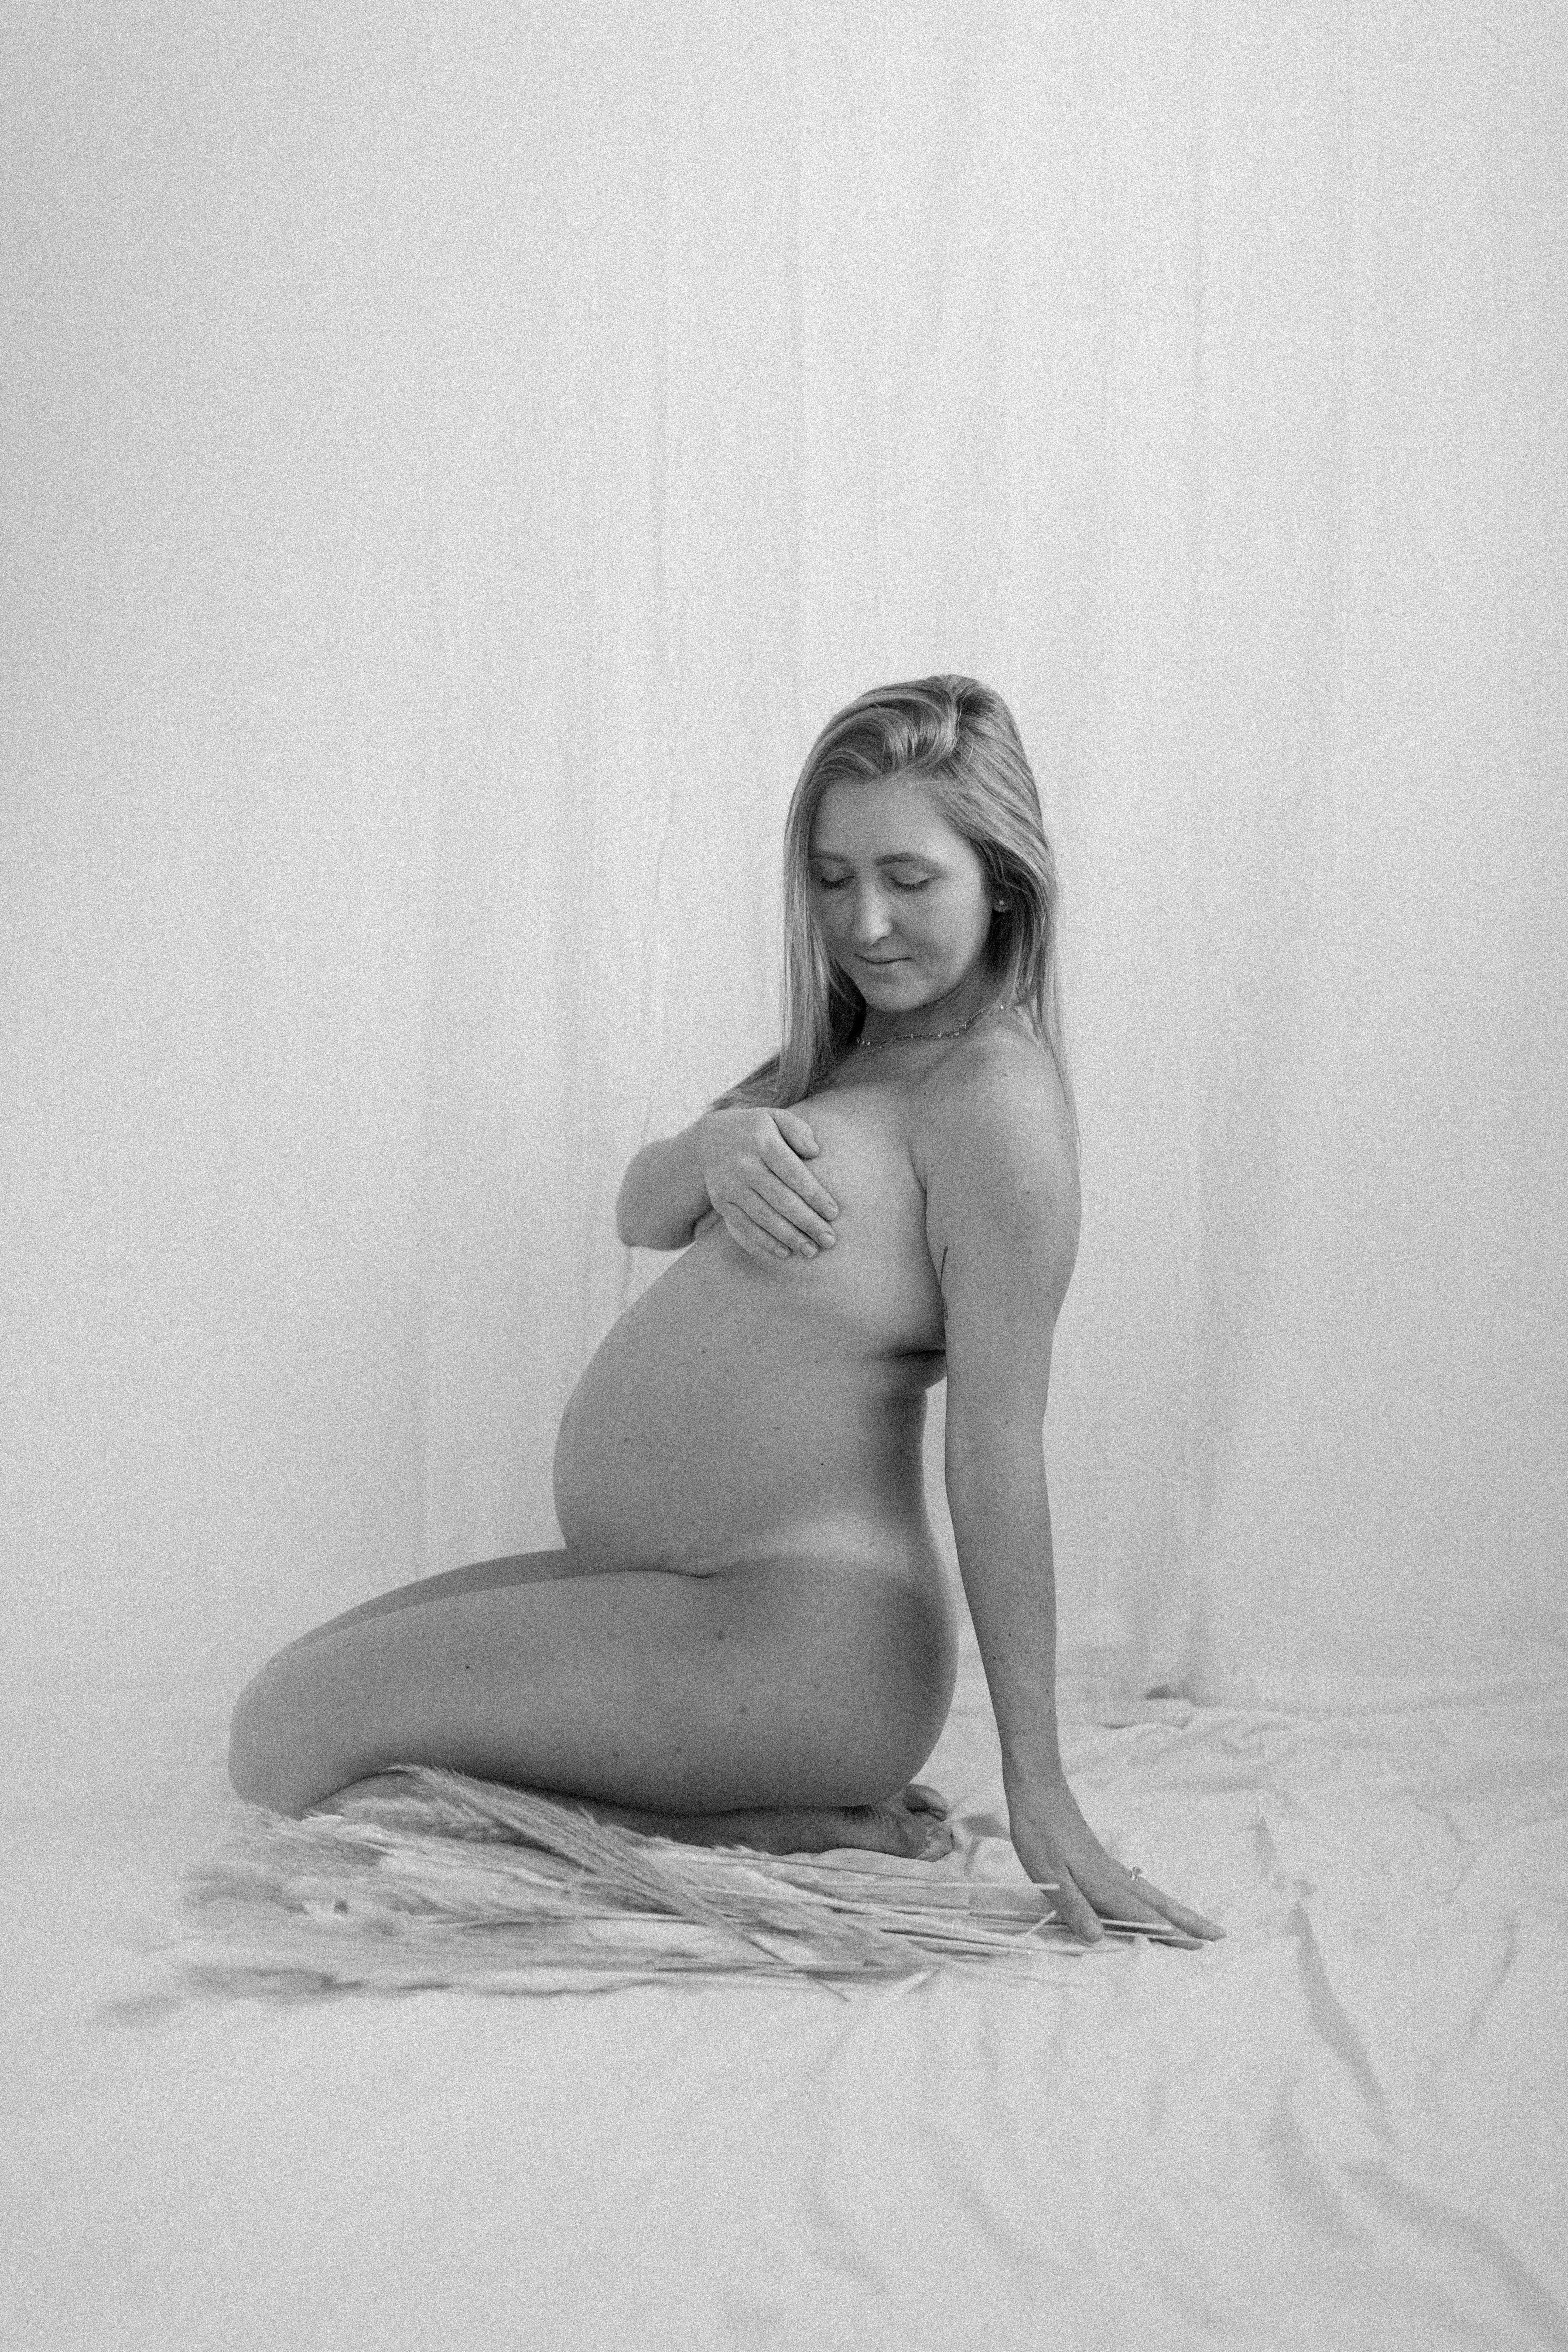 A pregnant woman sitting on a bed in a black and white photo photo